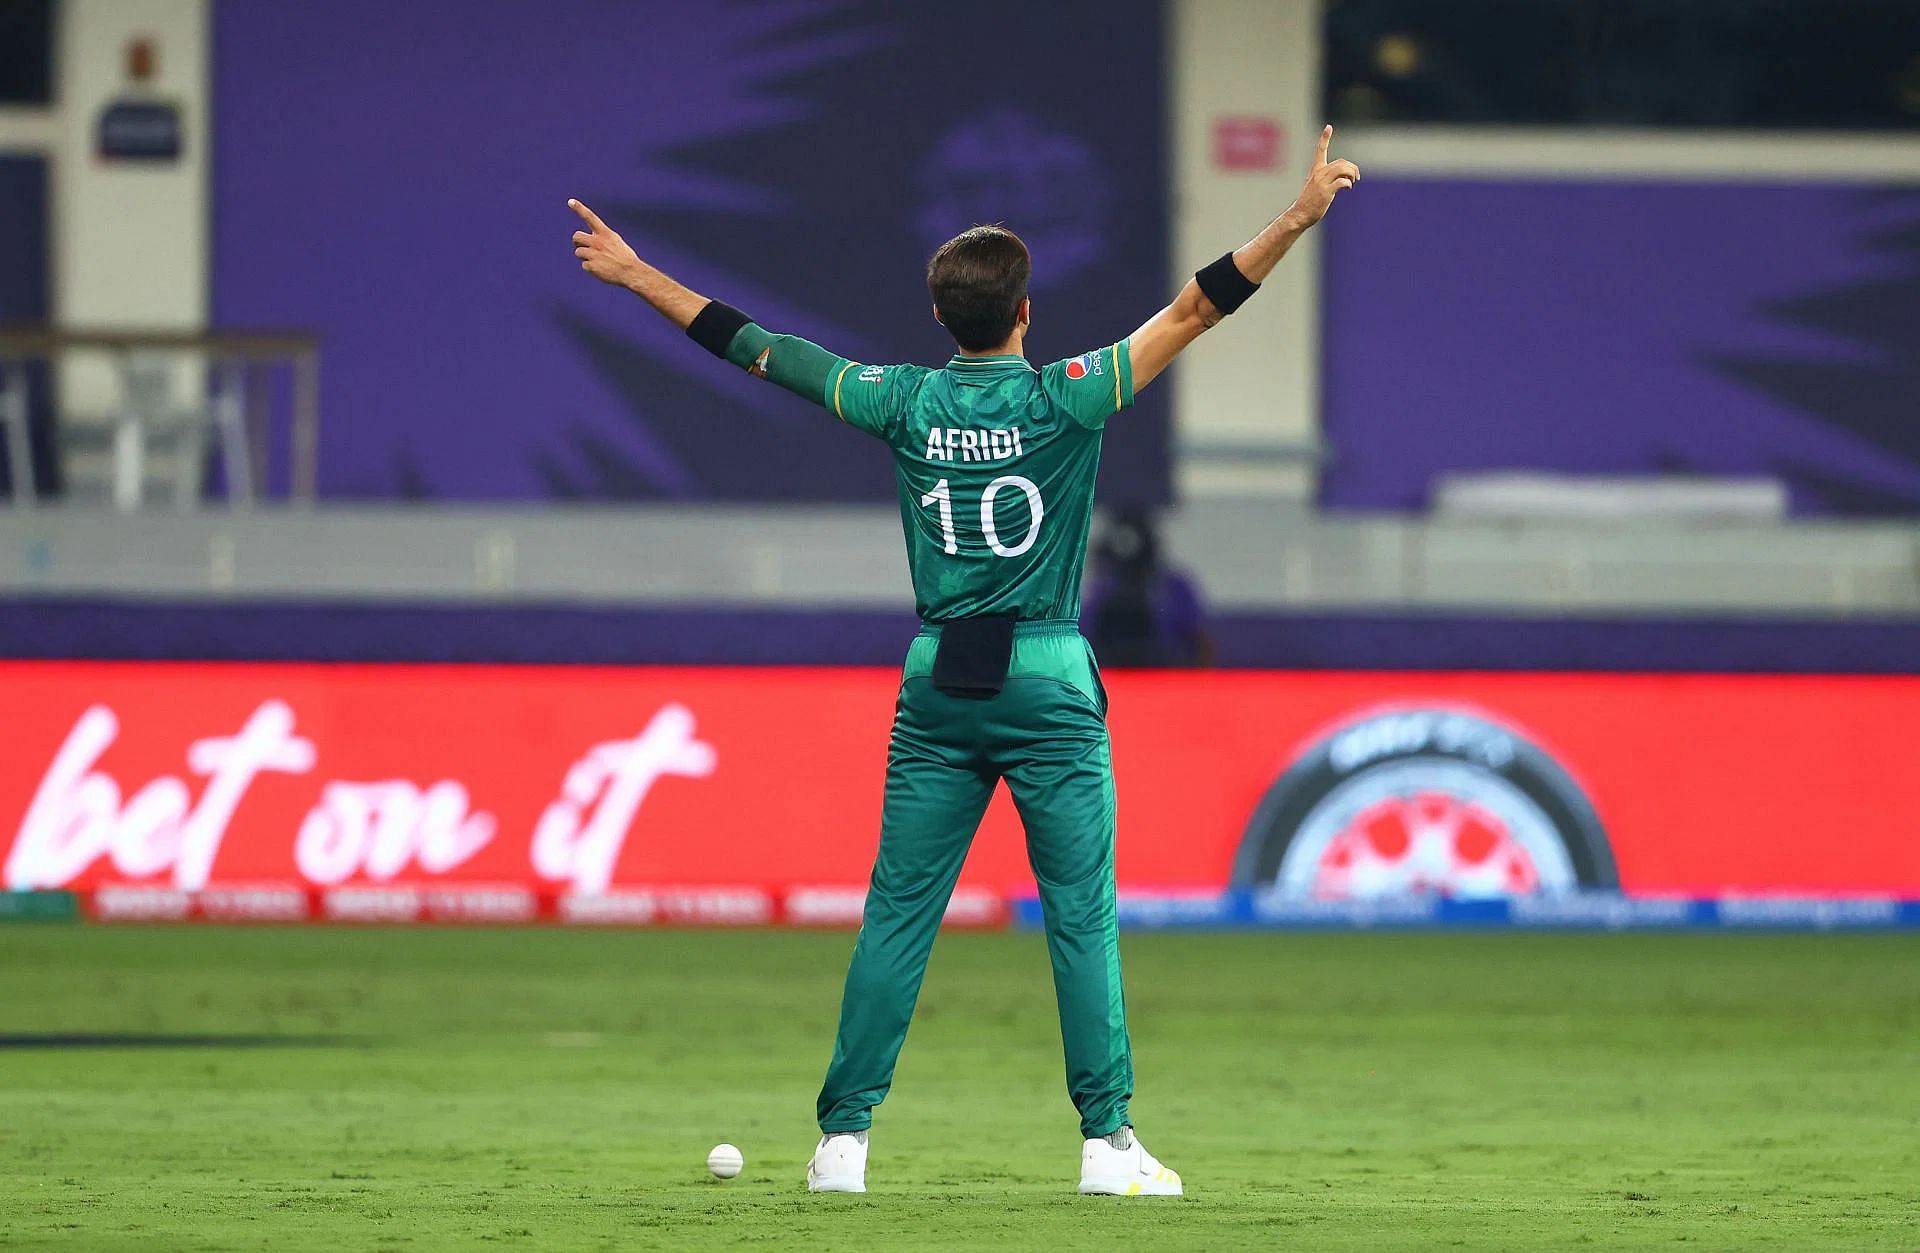 Shaheen Afridi celebrates a wicket during the T20 World Cup 2021 match against India. Pic: Getty Images